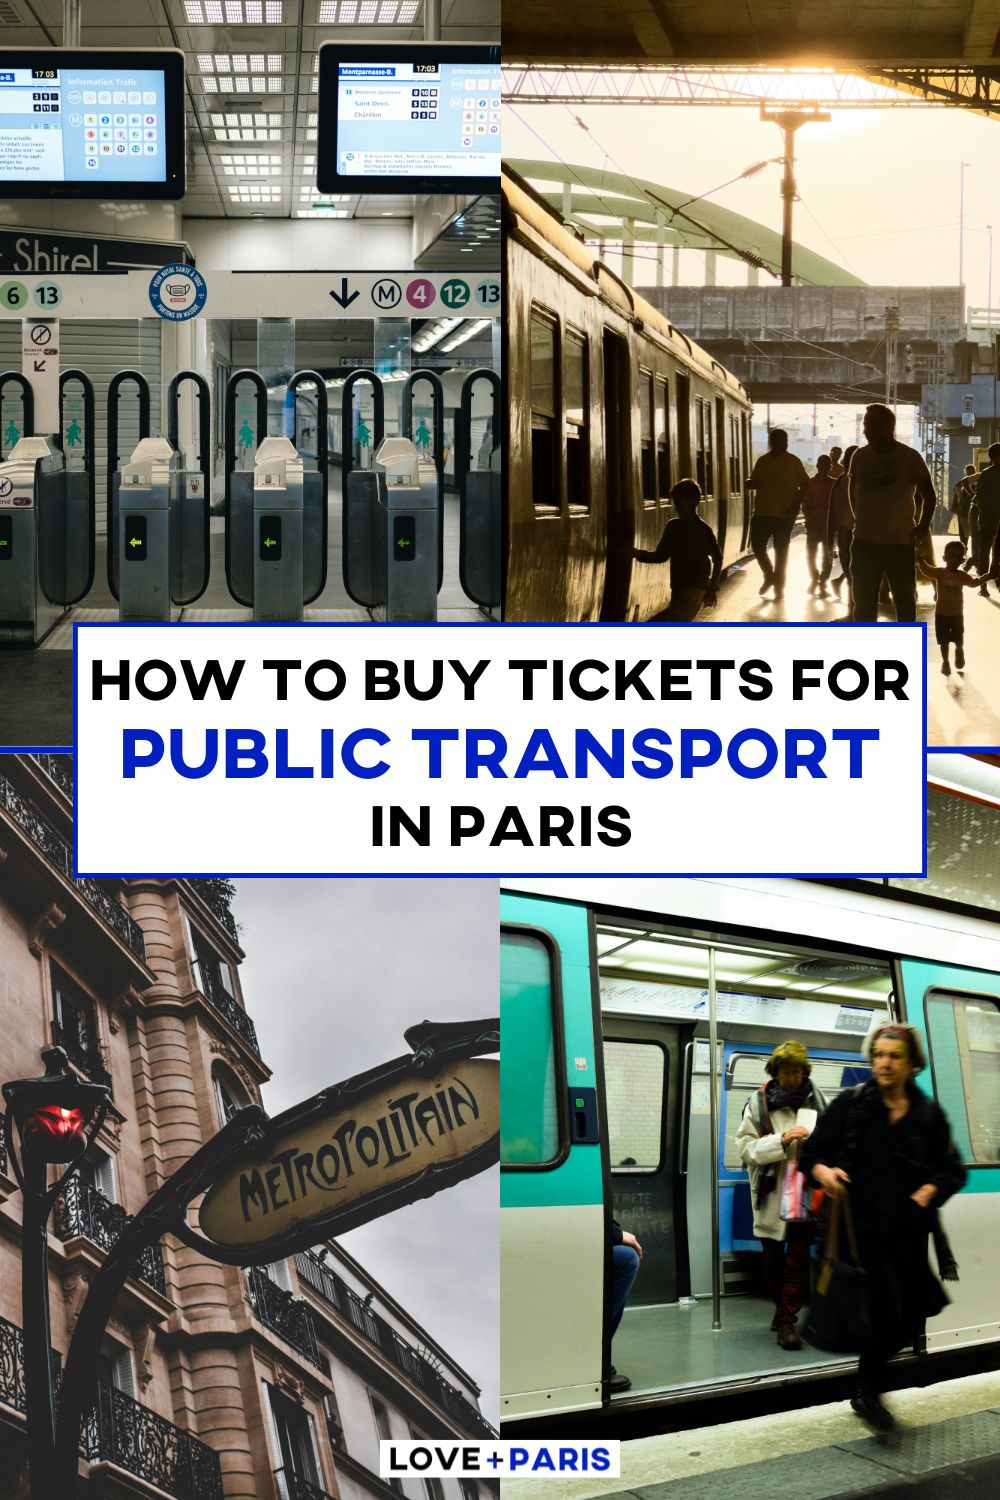 This is a Pinterest pin that details how to buy tickets for public transport in Paris.